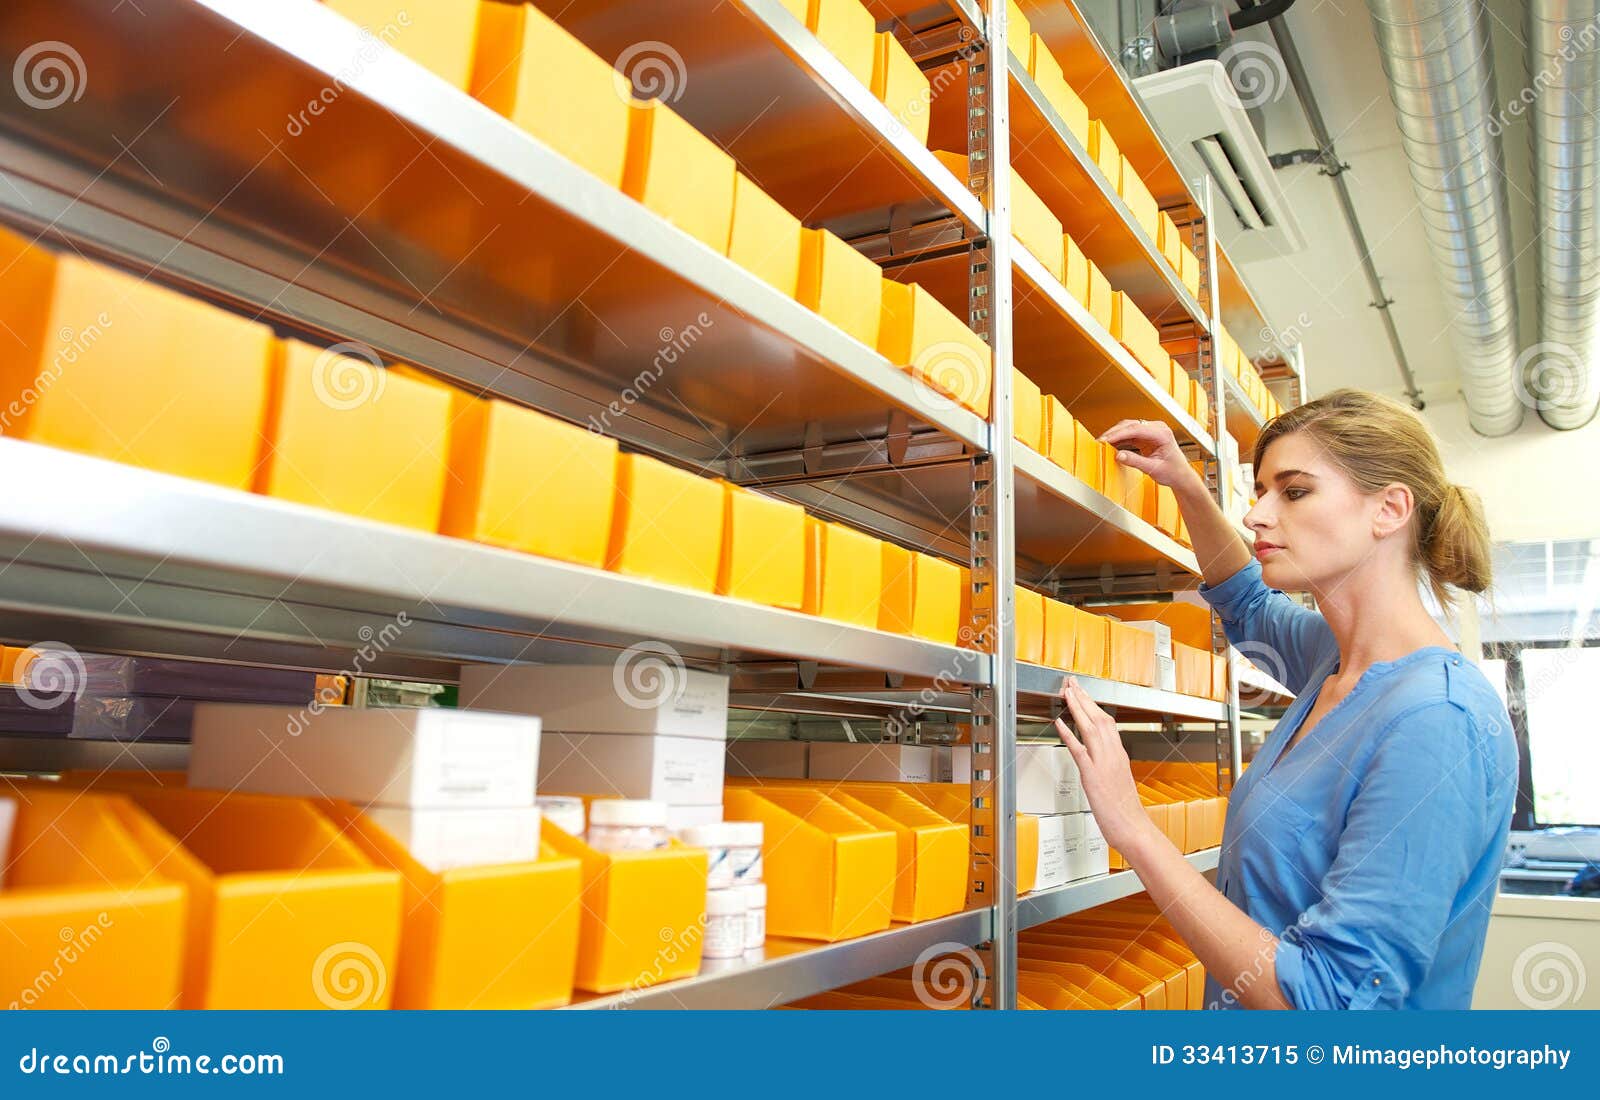 portrait of a female worker organizing boxes on shelves